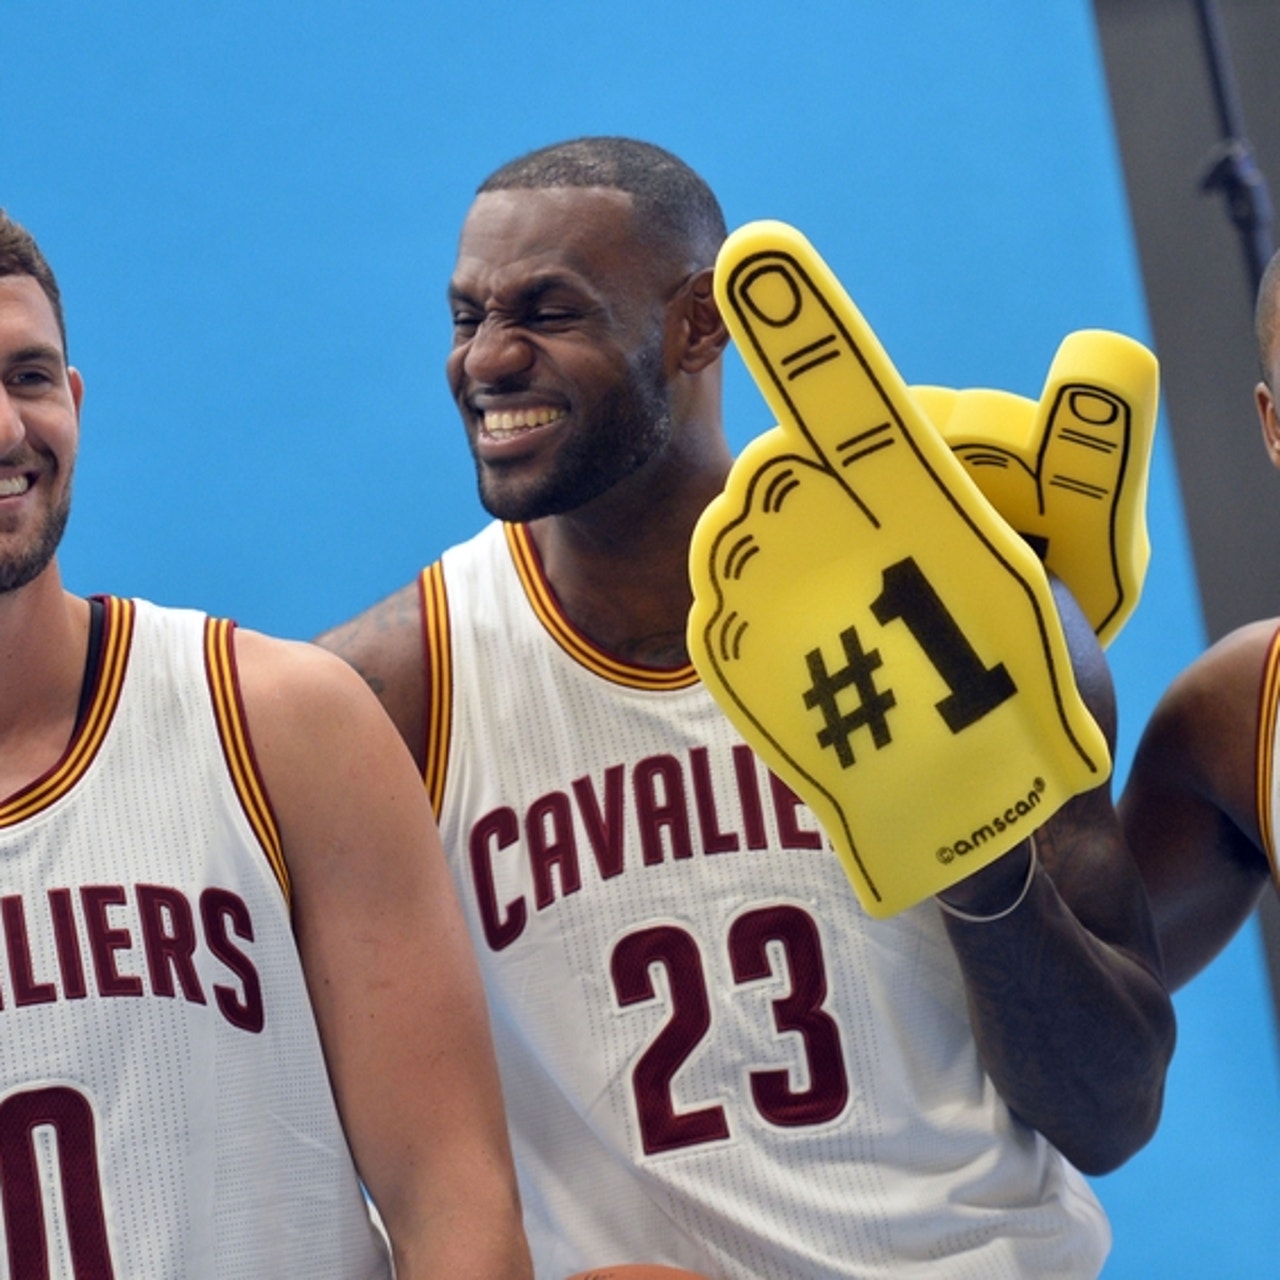 Kevin Love Says Kyrie Irving's Cavs Jersey Should Be Retired: 'Not